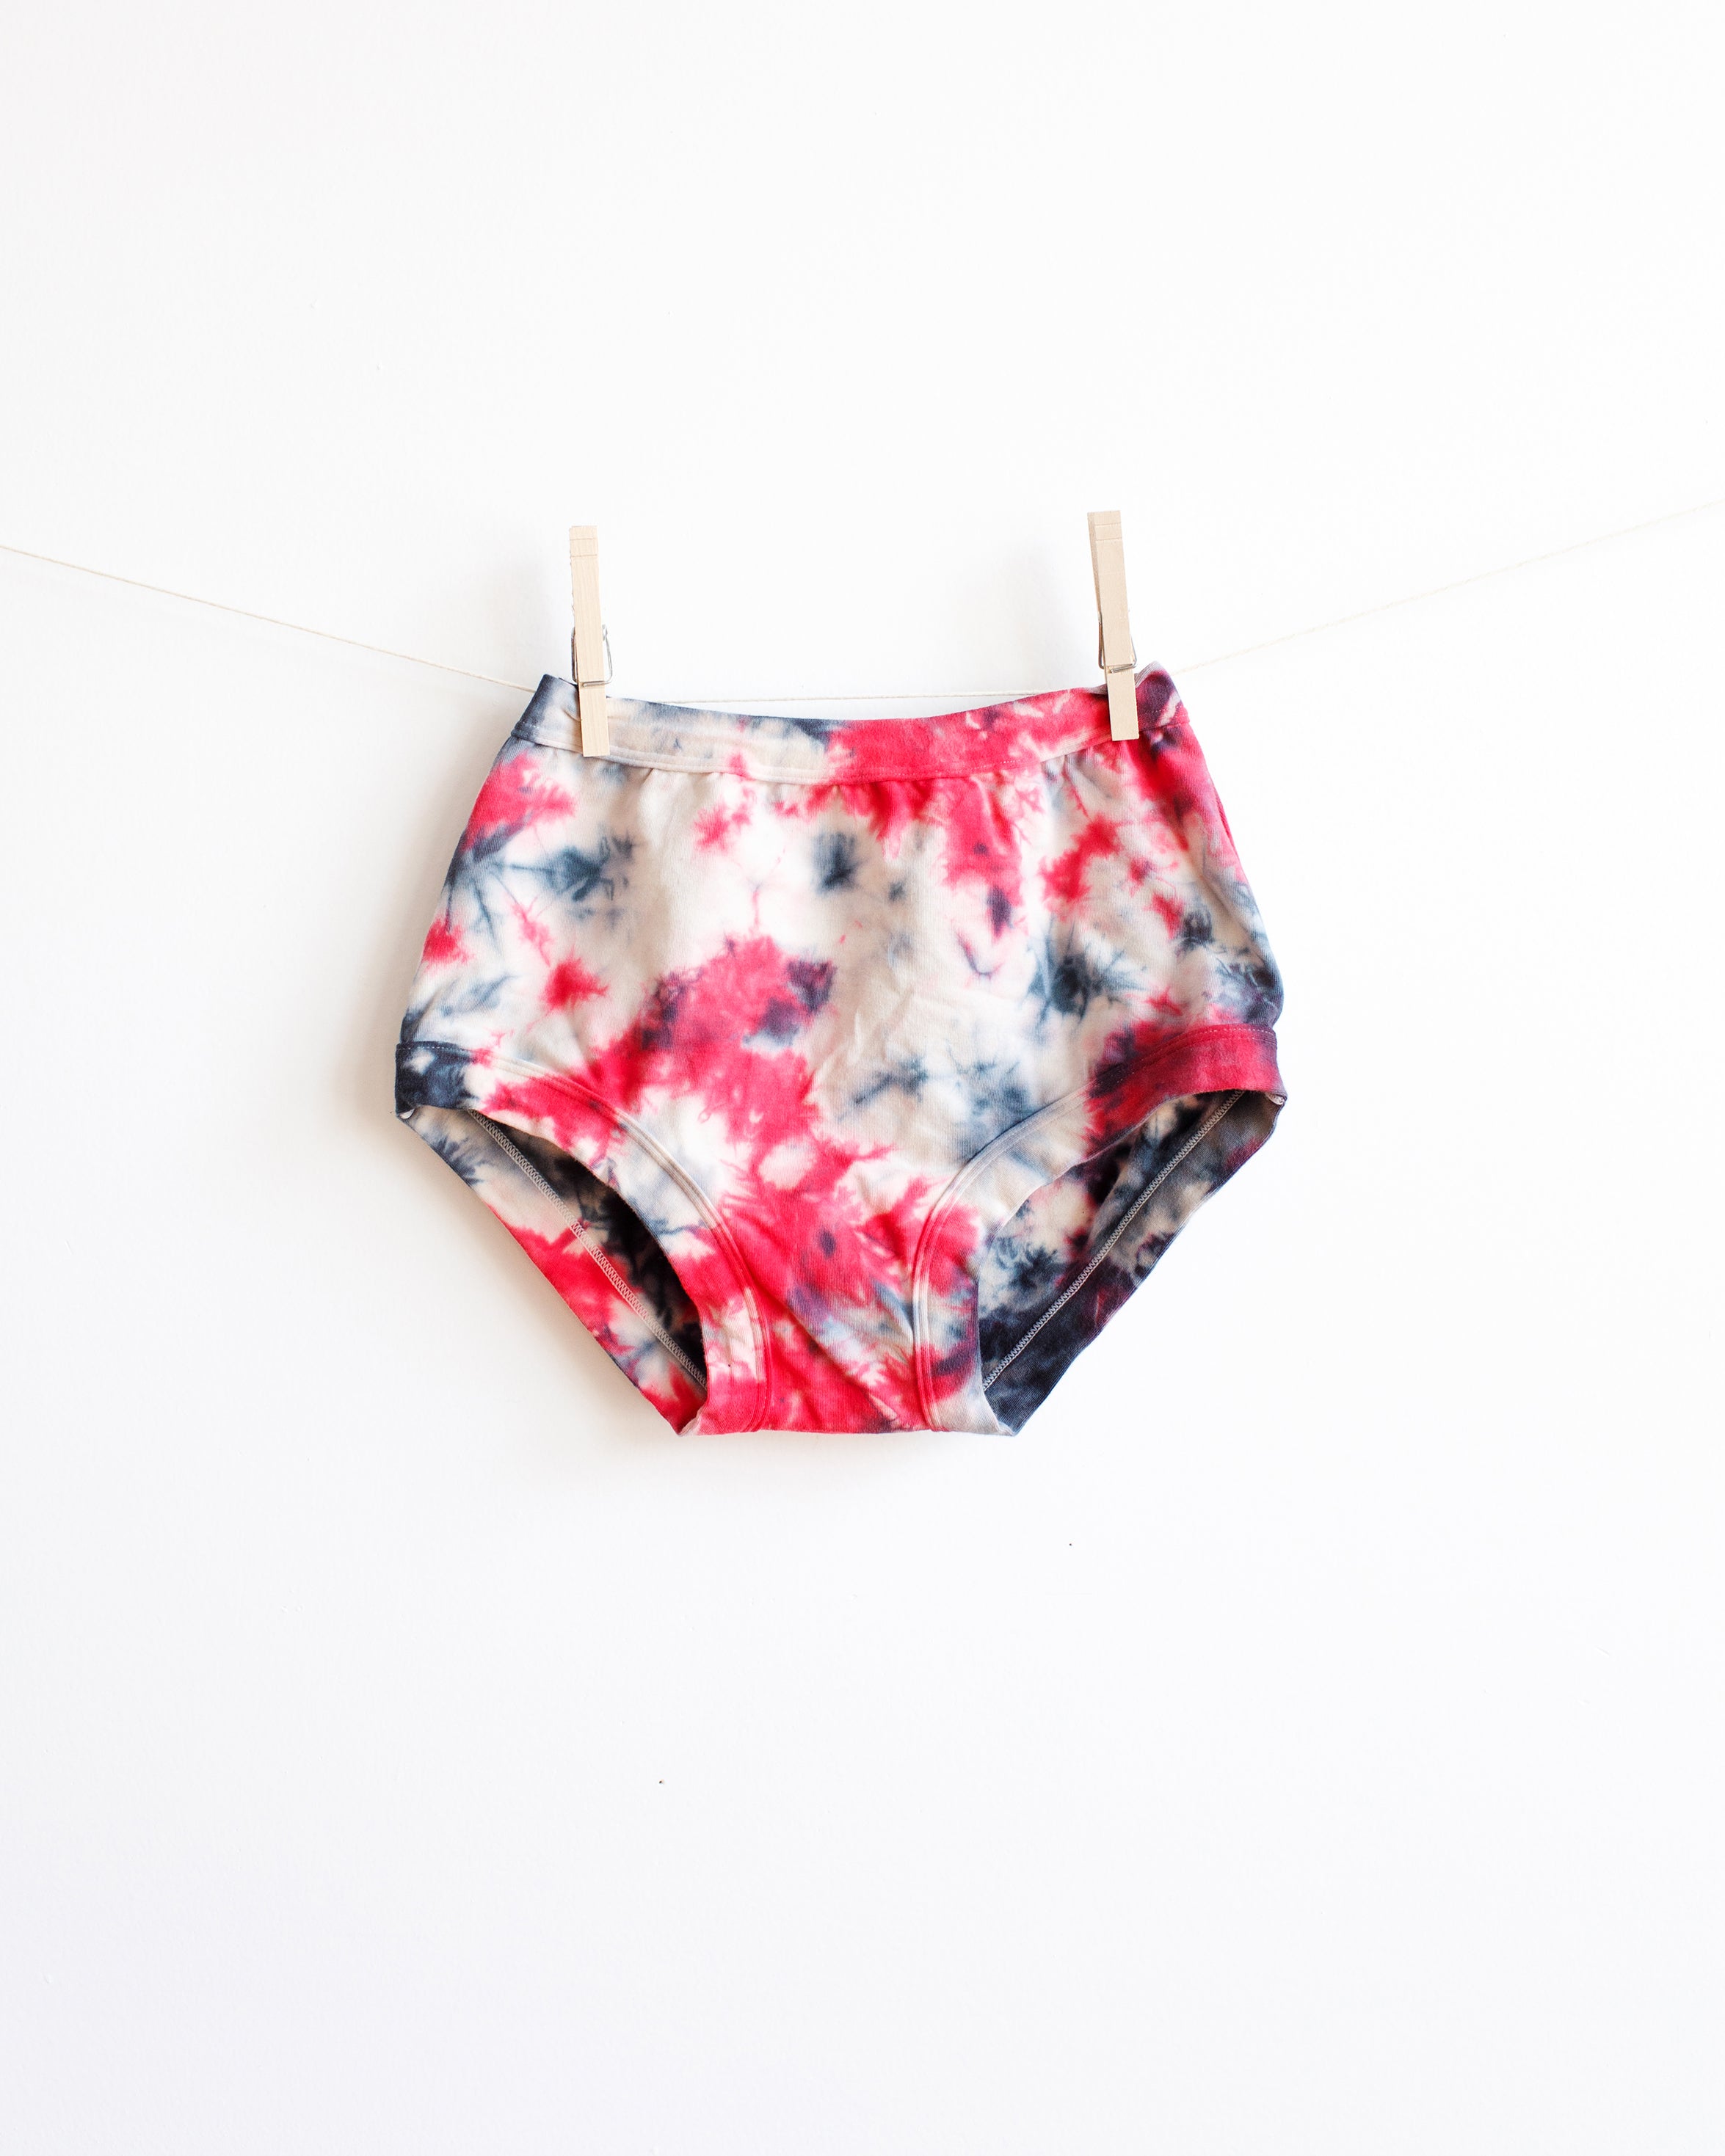 Thunderpants Original style underwear in black, red, and white scrunch dye hanging on a white background.